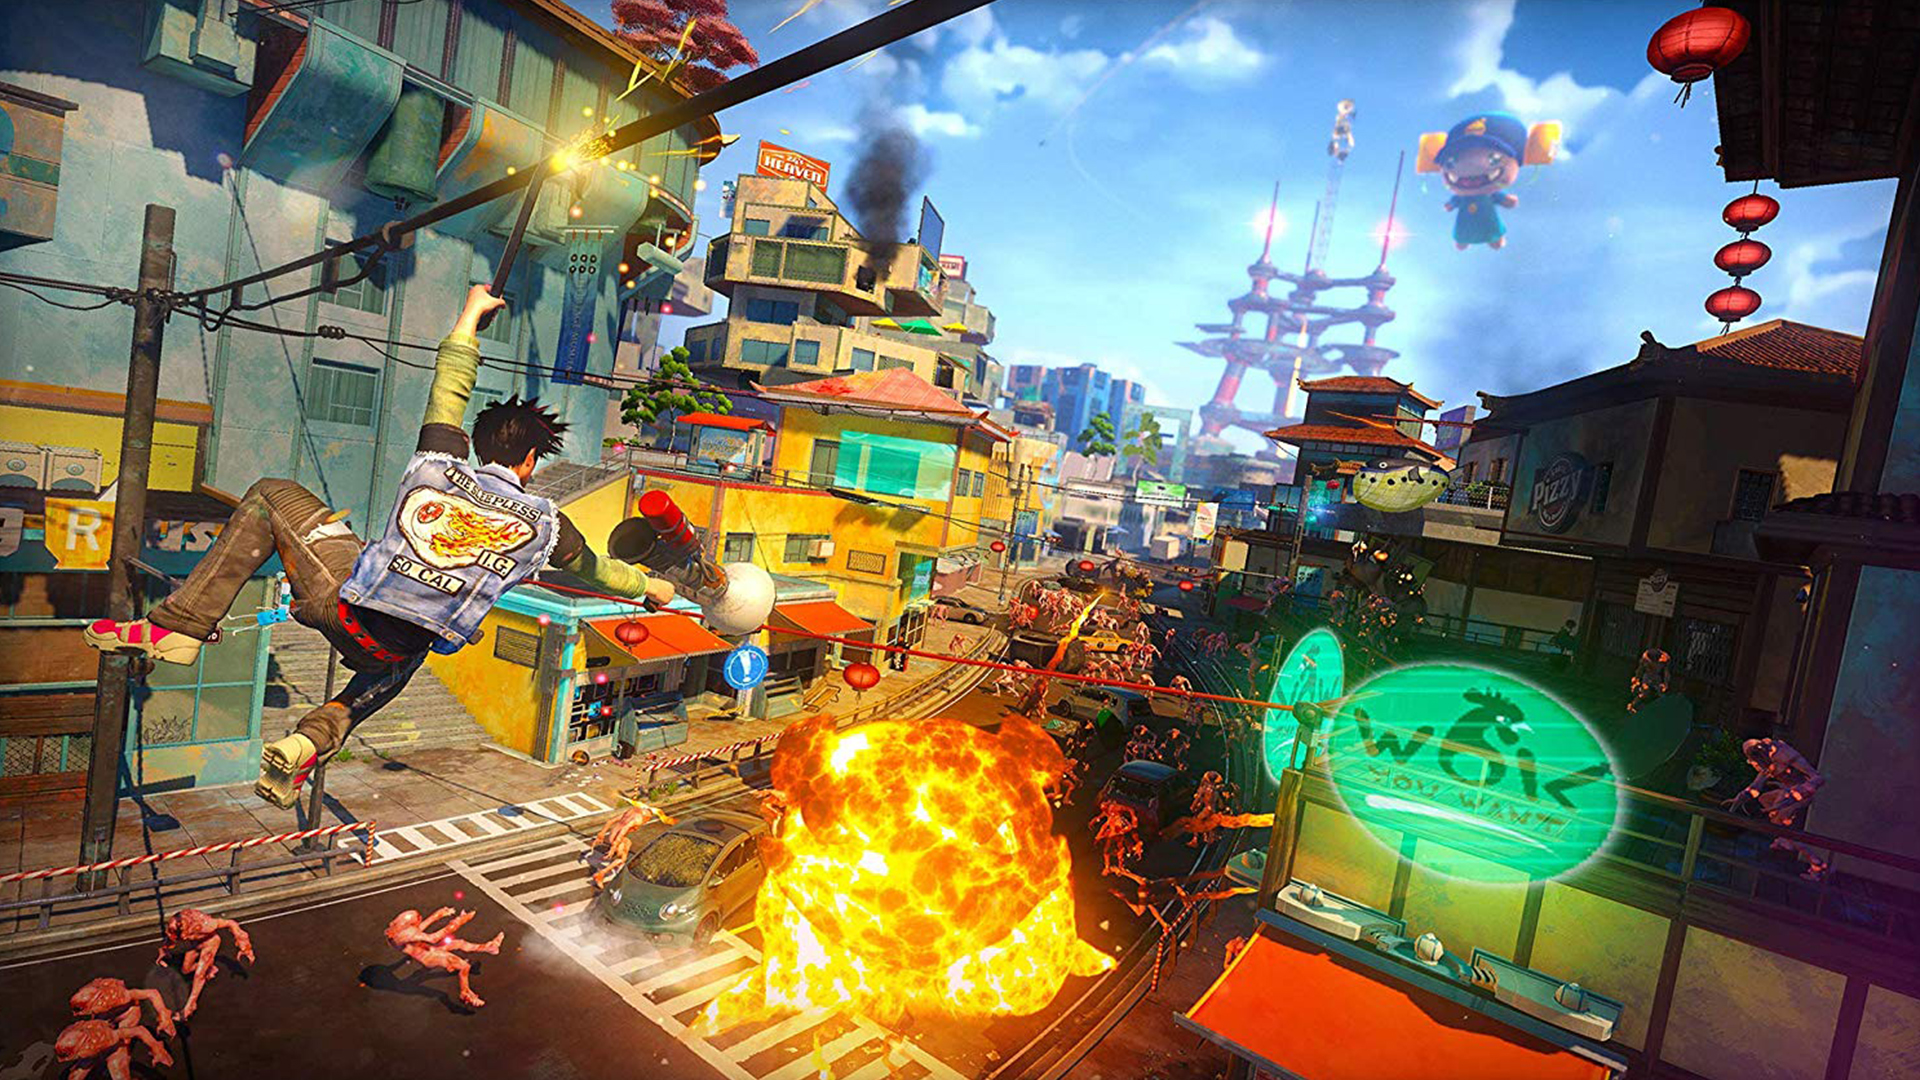 Sunset Overdrive is coming to Steam and Windows Store today